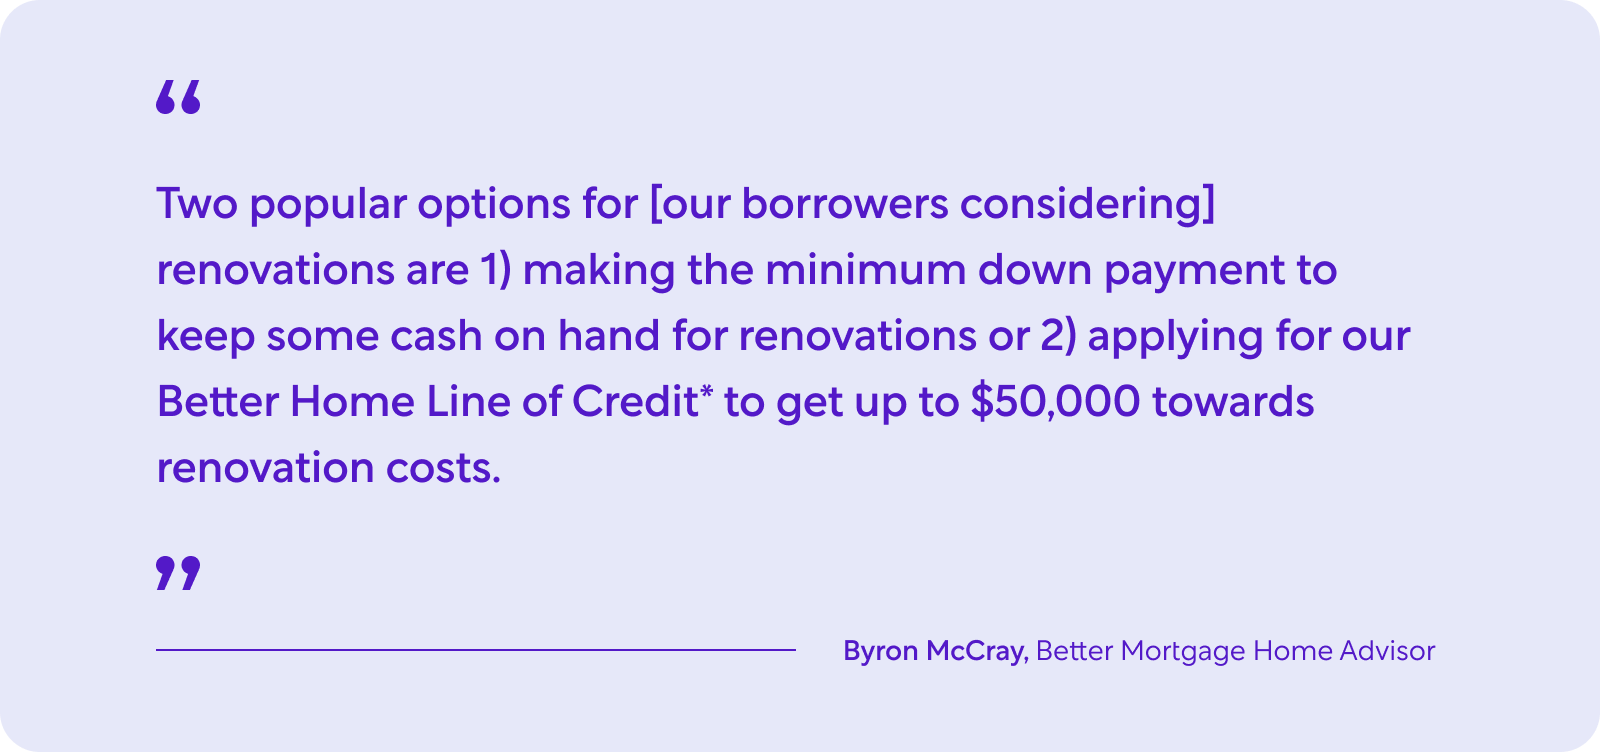 Quote from Byron McCray, Better Mortgage Home Advisor